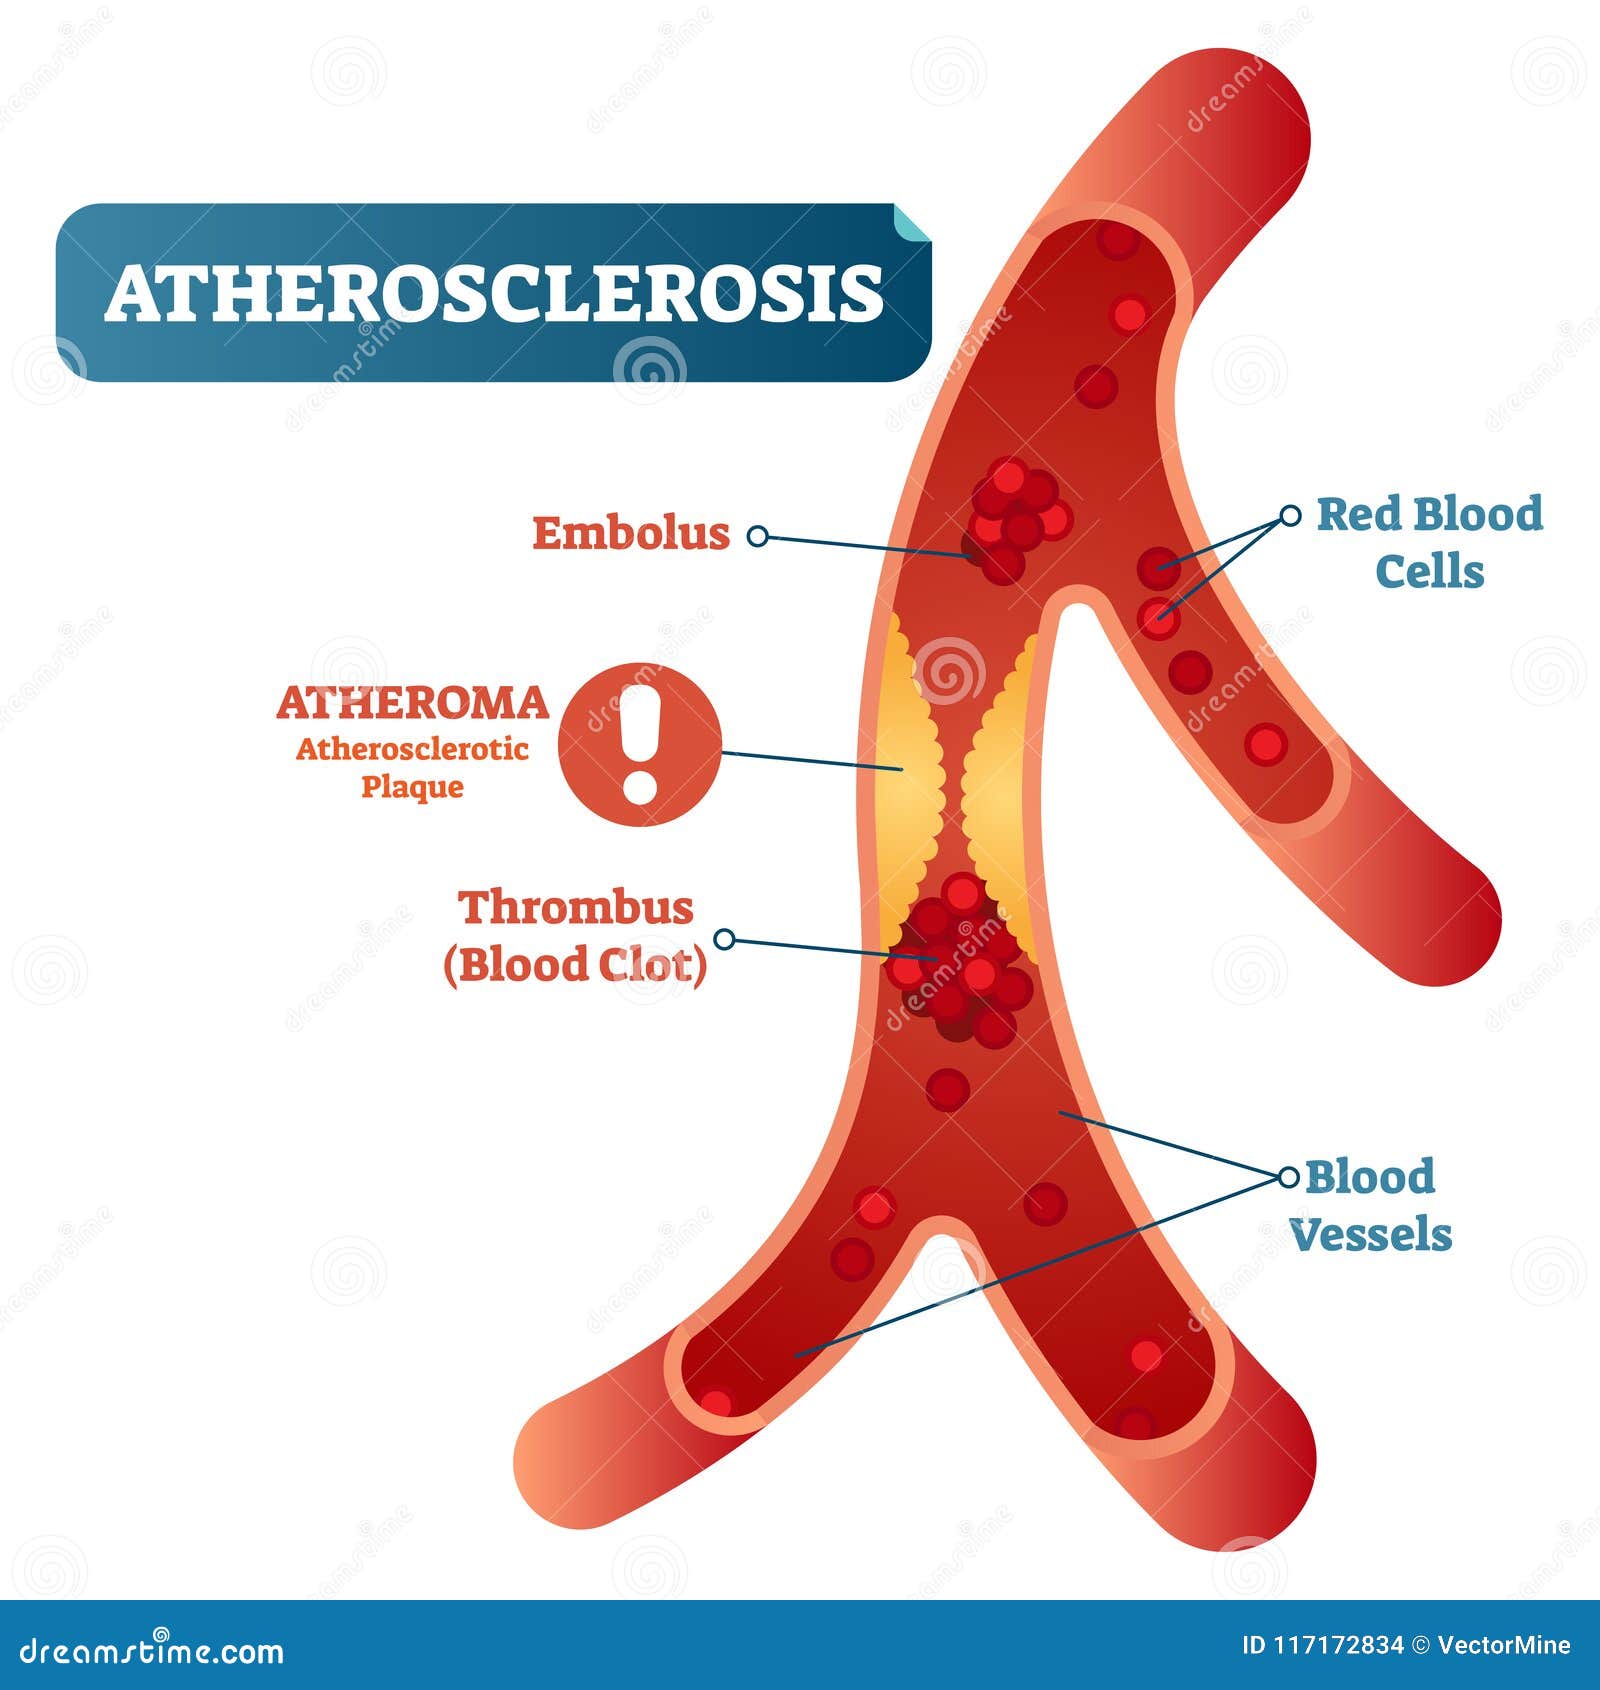 atherosclerosis-medical-vector-illustration-cross-section-diagram-unhealthy-blood-vessel